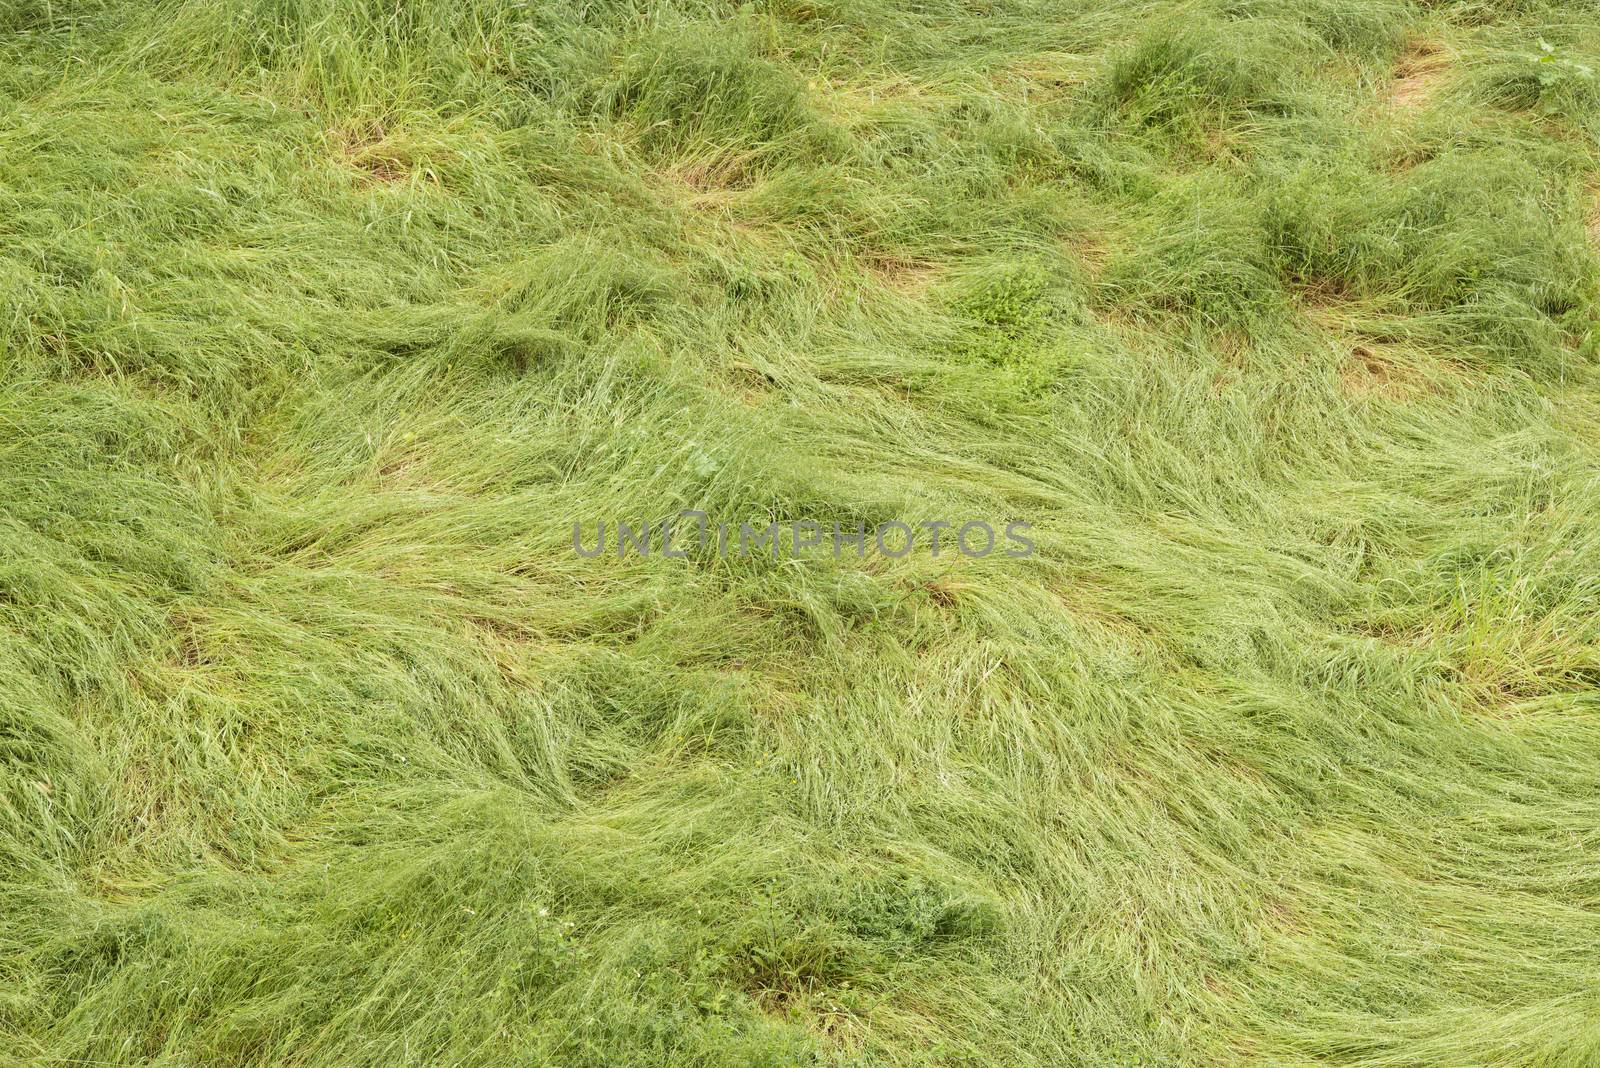 Green long grass bent and twirled by strong winds.